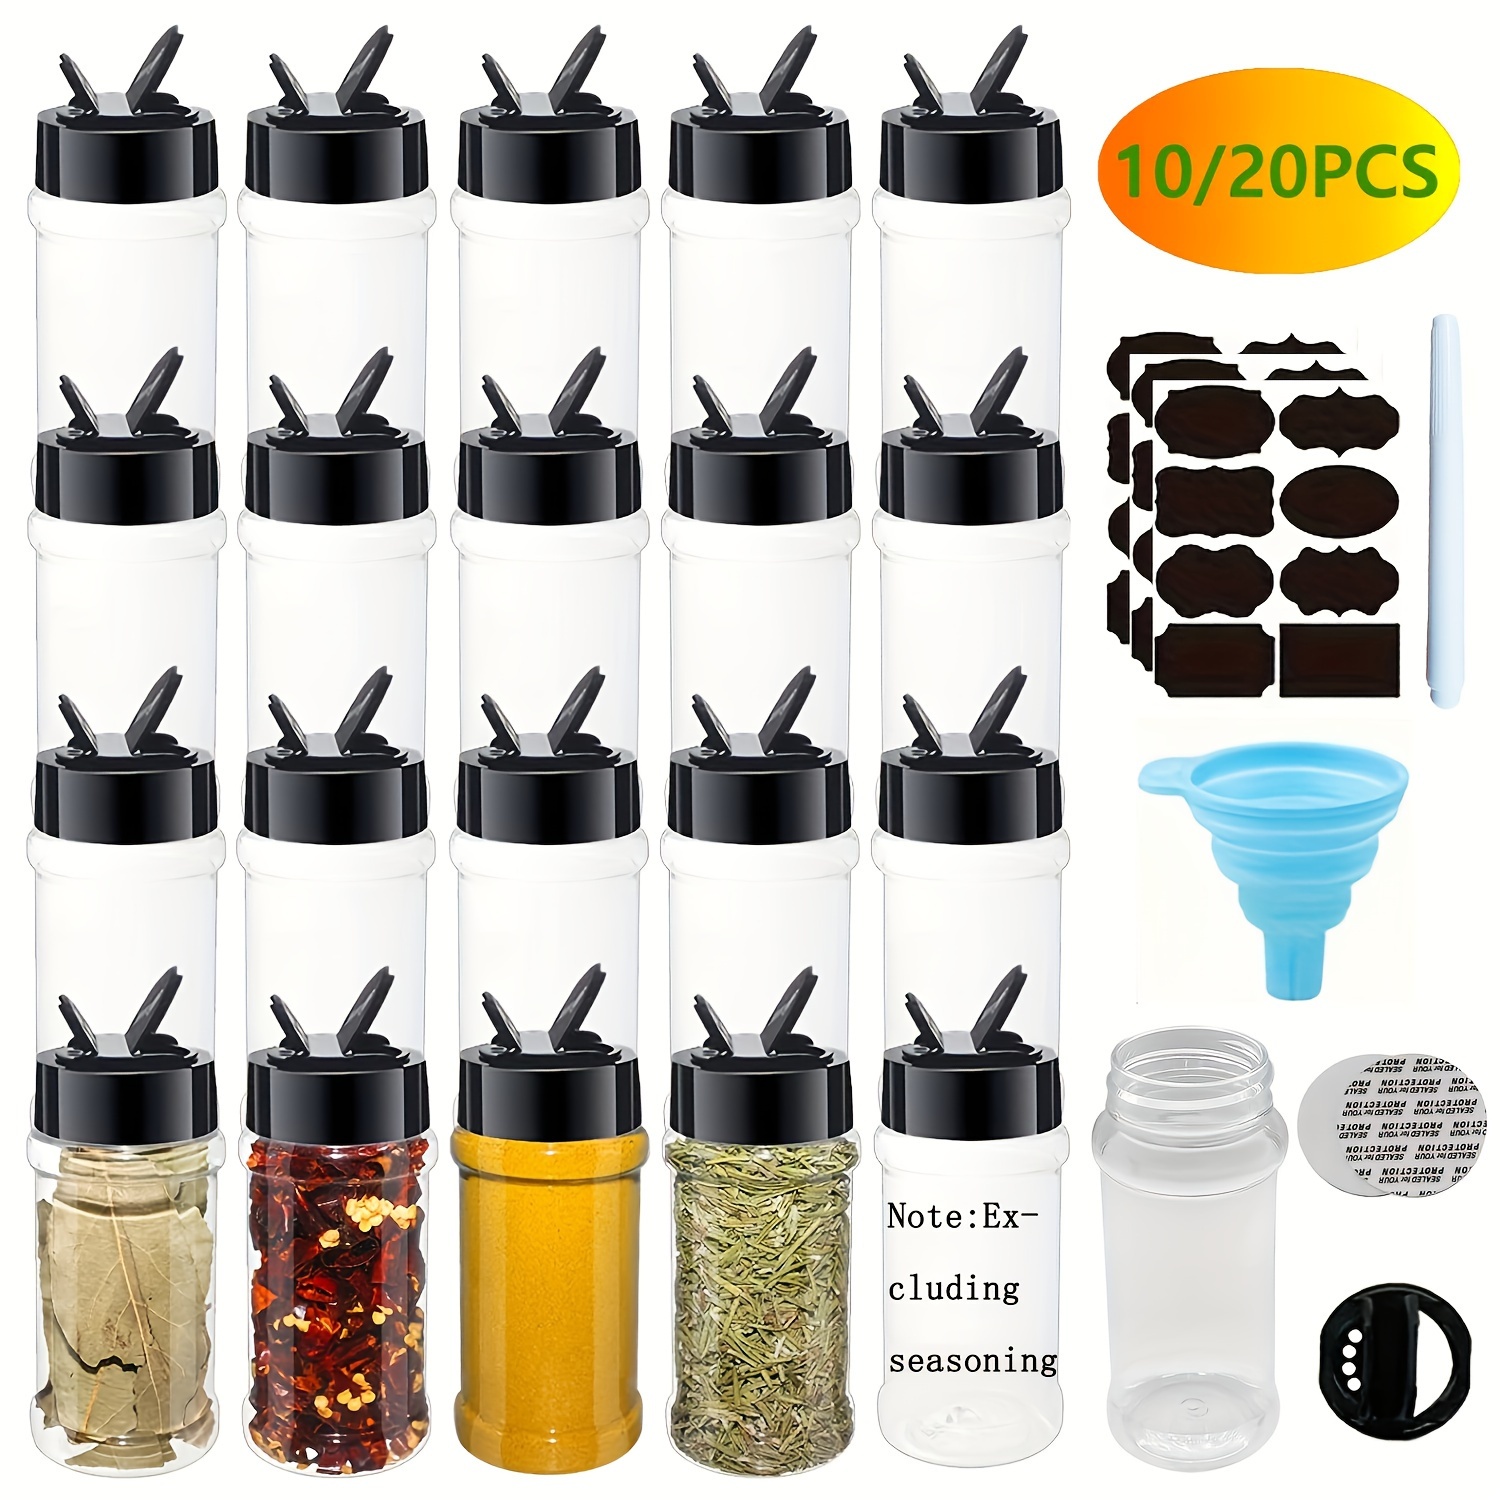 

10/20pcs, Spice Shakers, Plastic Spice Jars Bottles With Labels And Funnel, Spice Containers For Storing Spice, And Powders, With Black Flip Top Cap, Salt And Pepper Shaker Bottle, Kitchen Sutuff